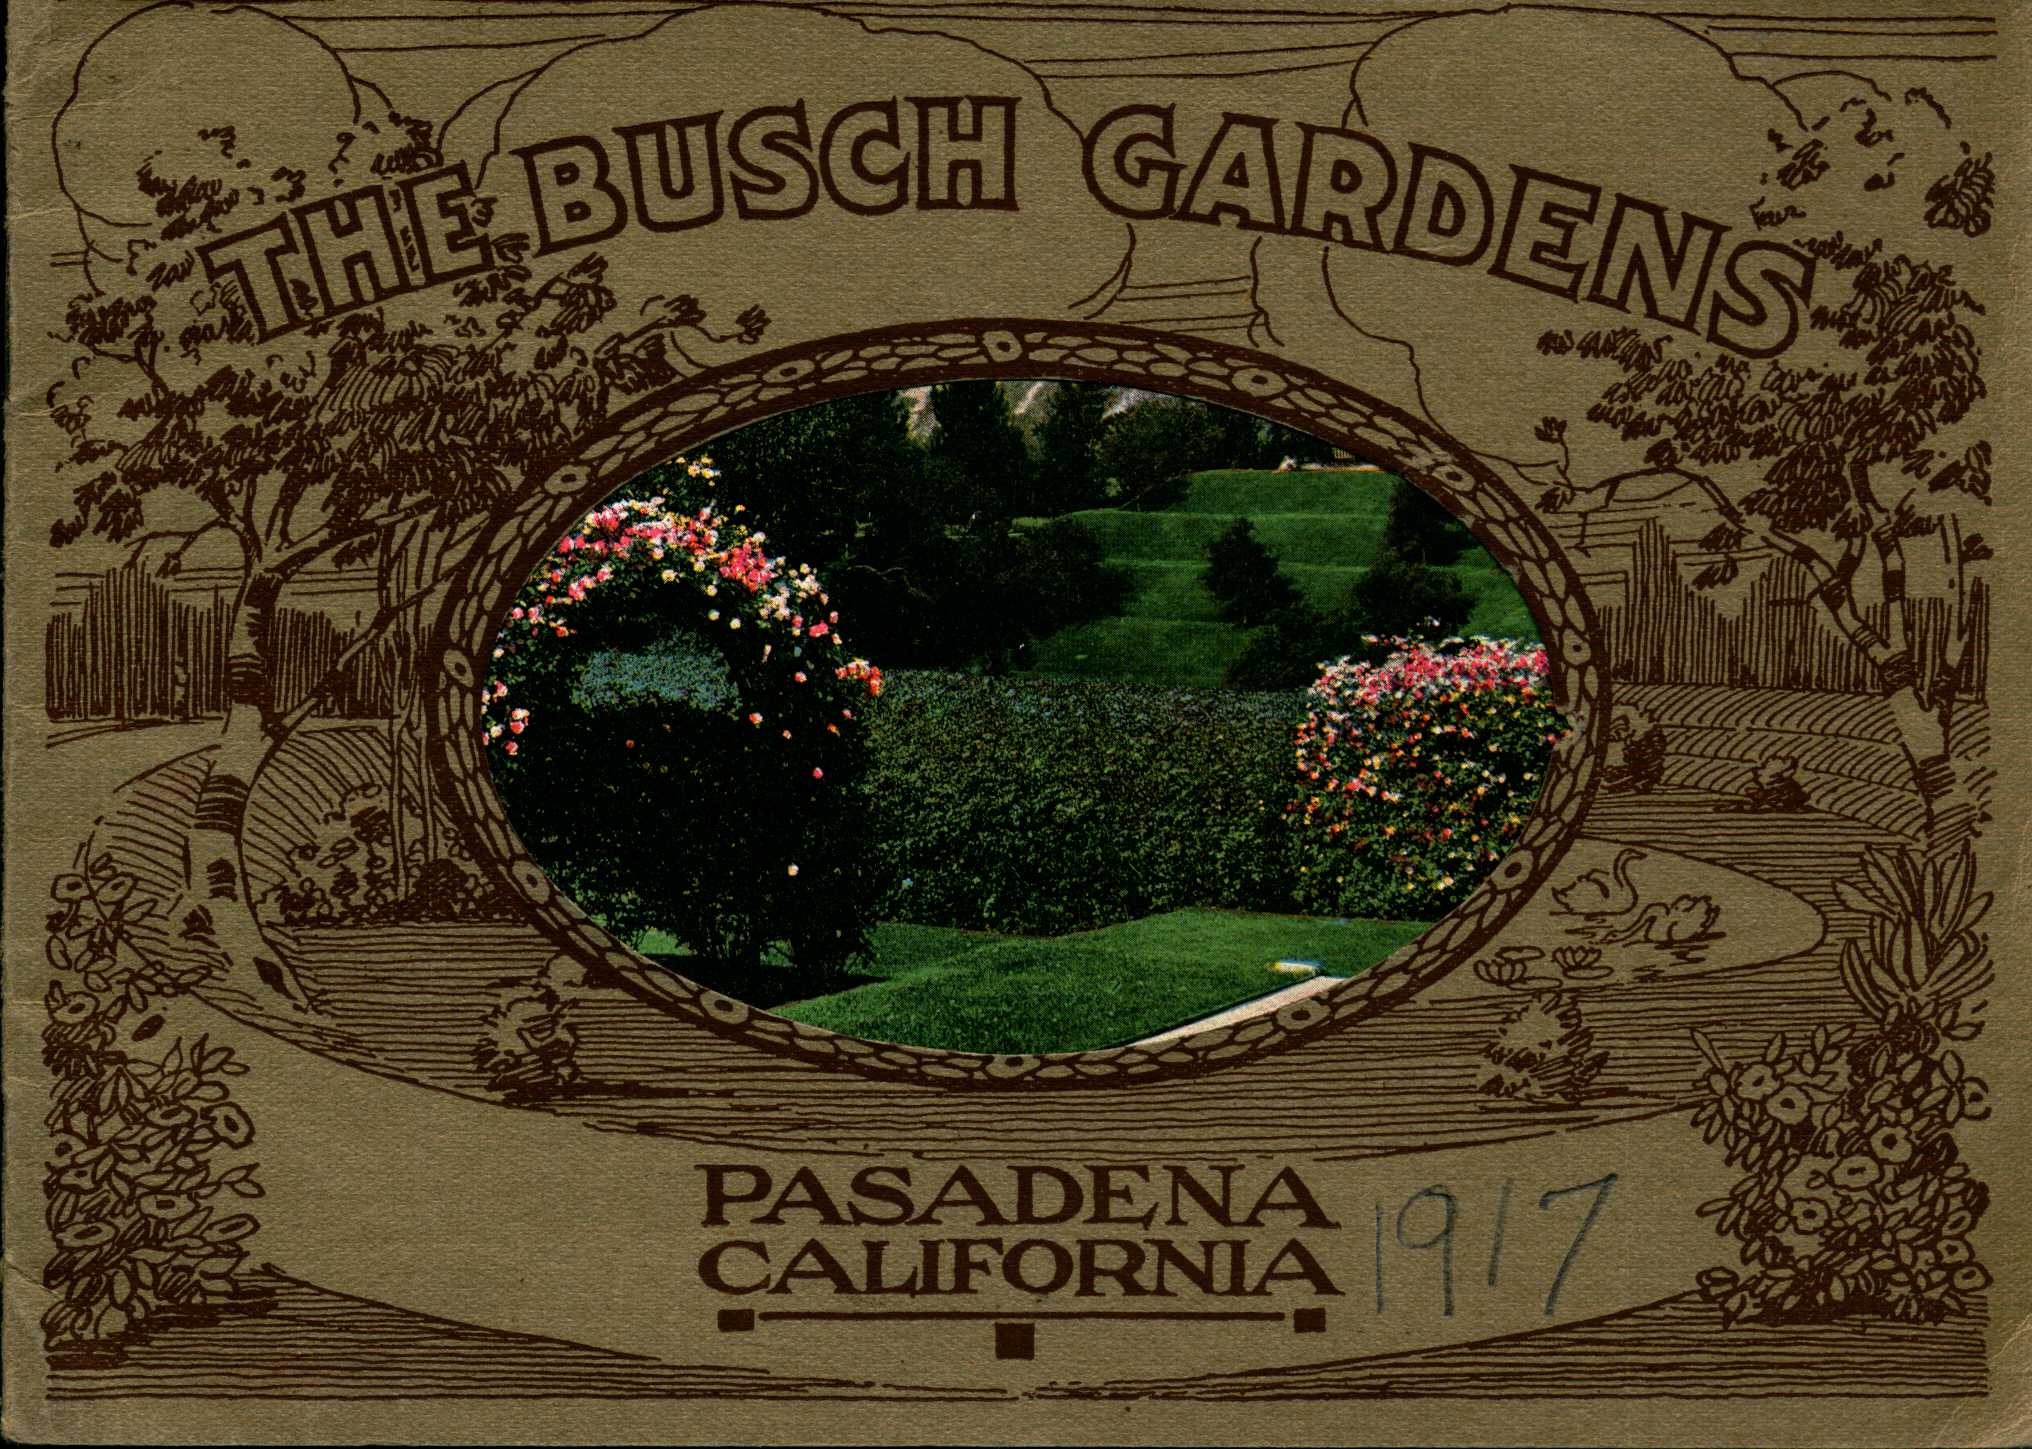 Front cover shows a line drawing illustration of Busch gardens with a central cutout showing a color version